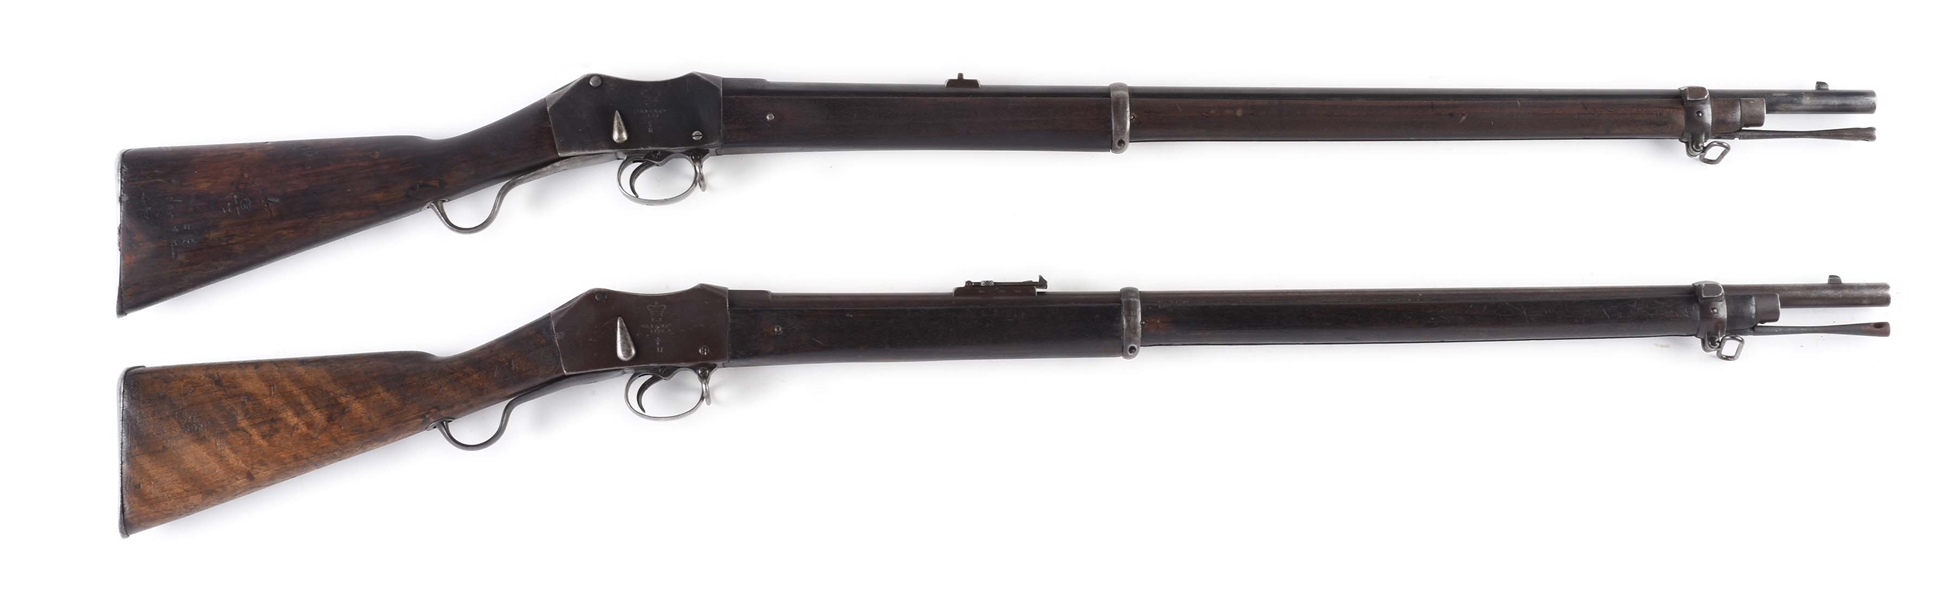 (A) LOT OF 2: MARTINI-HENRY BRITISH MILITARY ISSUE RIFLES BY BSA (1876 & 1877).